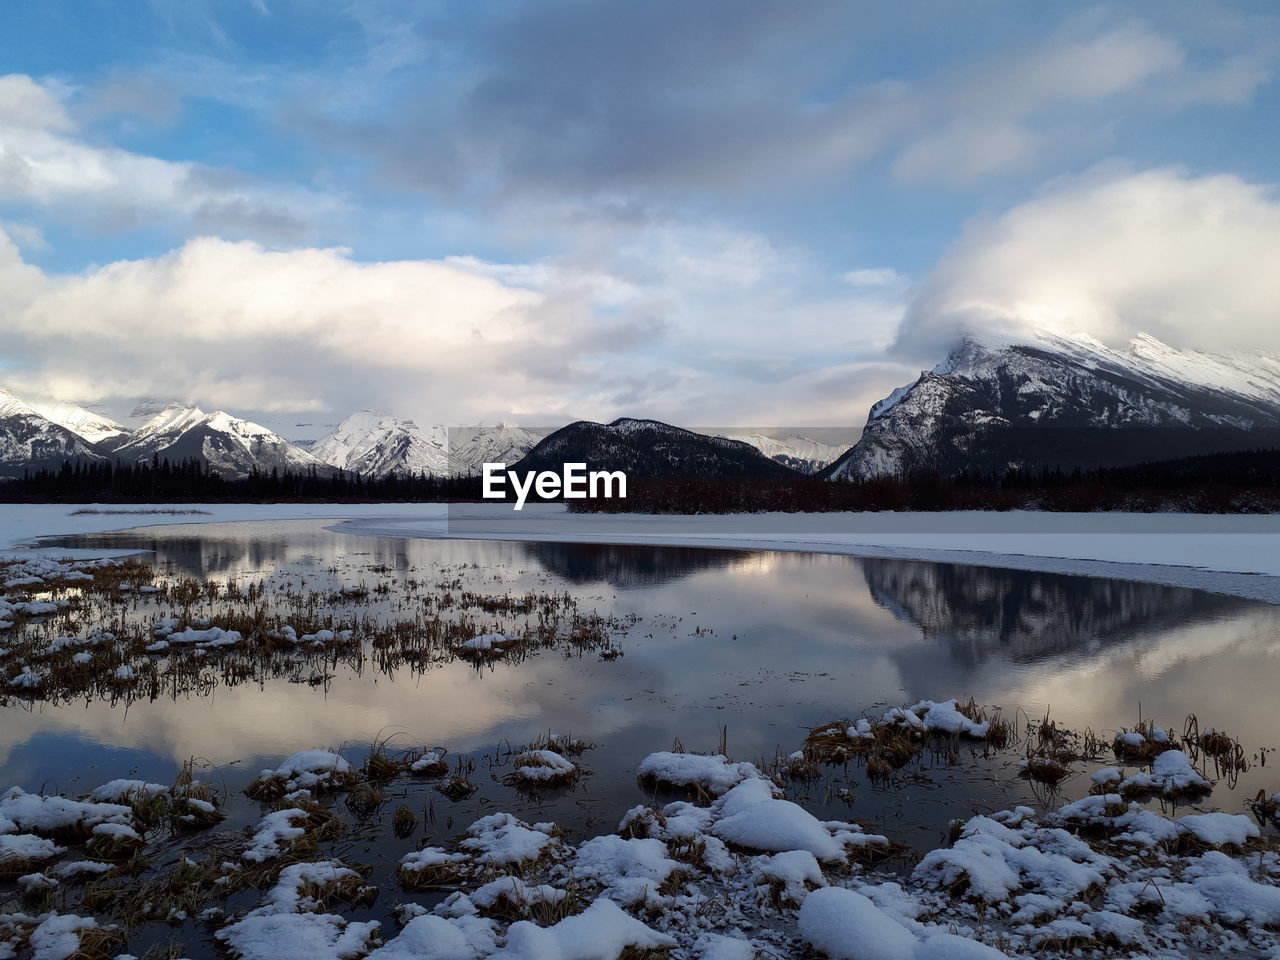 SCENIC VIEW OF LAKE BY SNOWCAPPED MOUNTAINS AGAINST SKY DURING WINTER